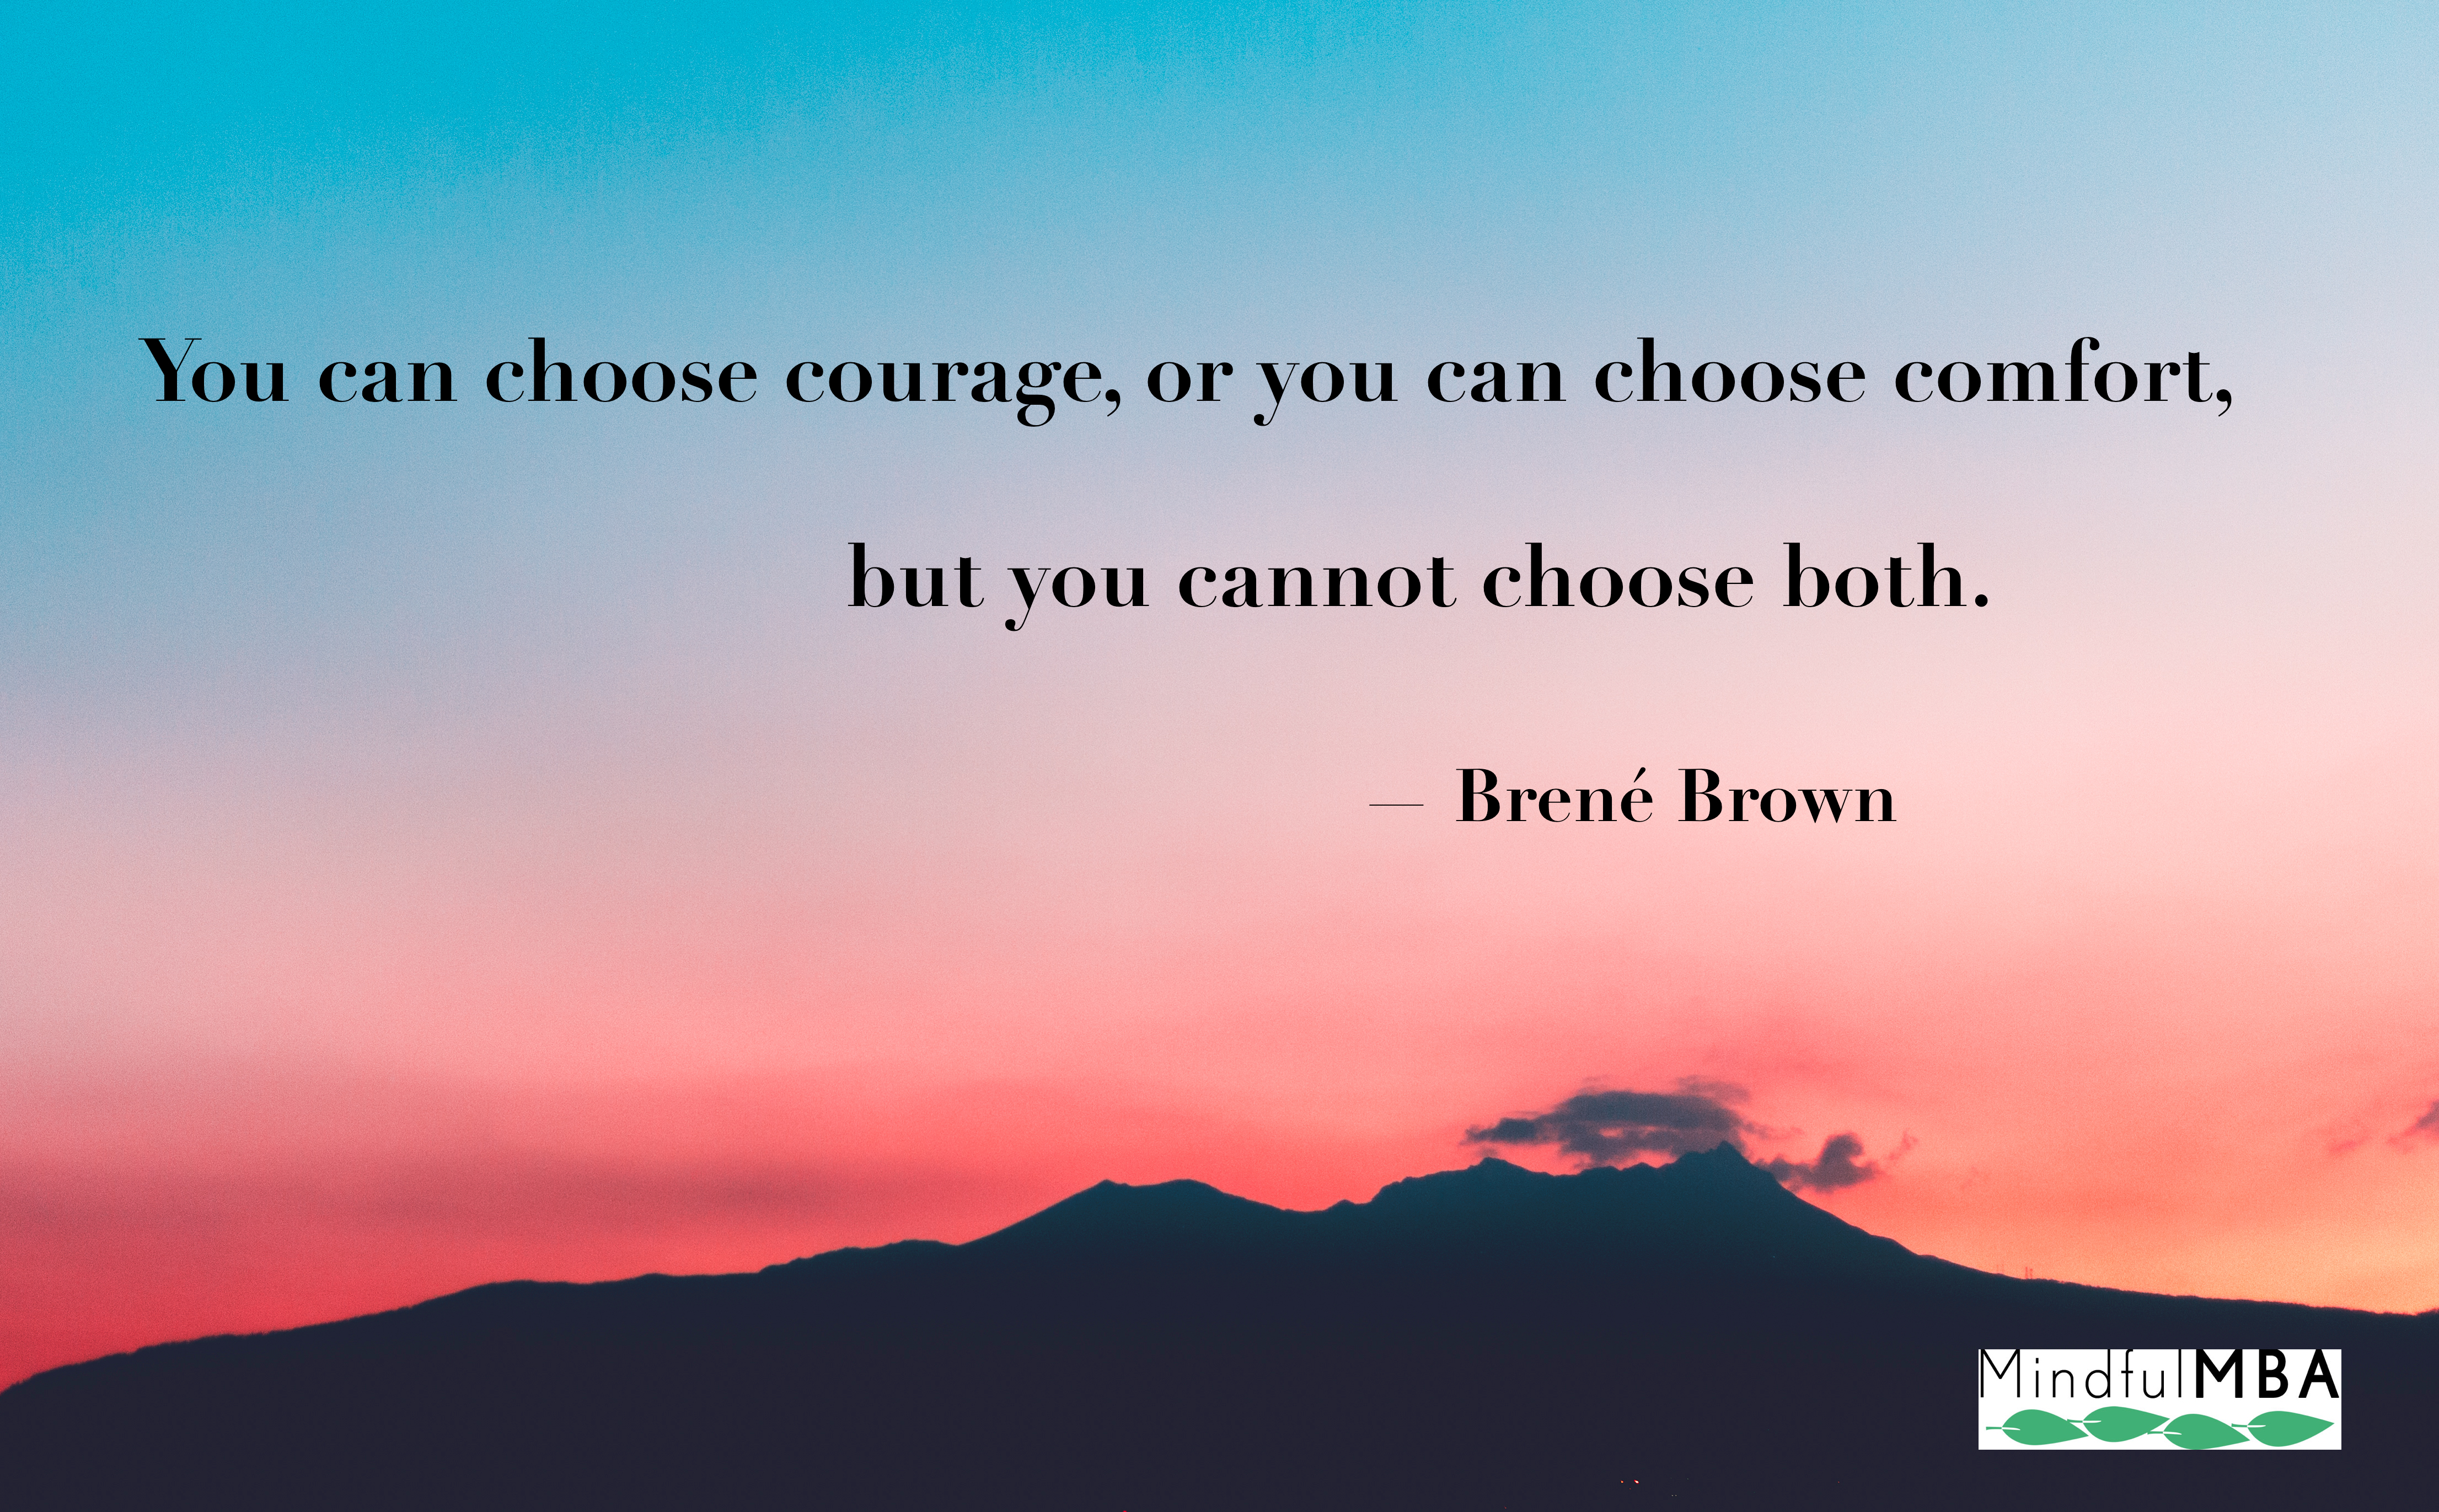 Brene Brown Courage or Comfort quote w tag